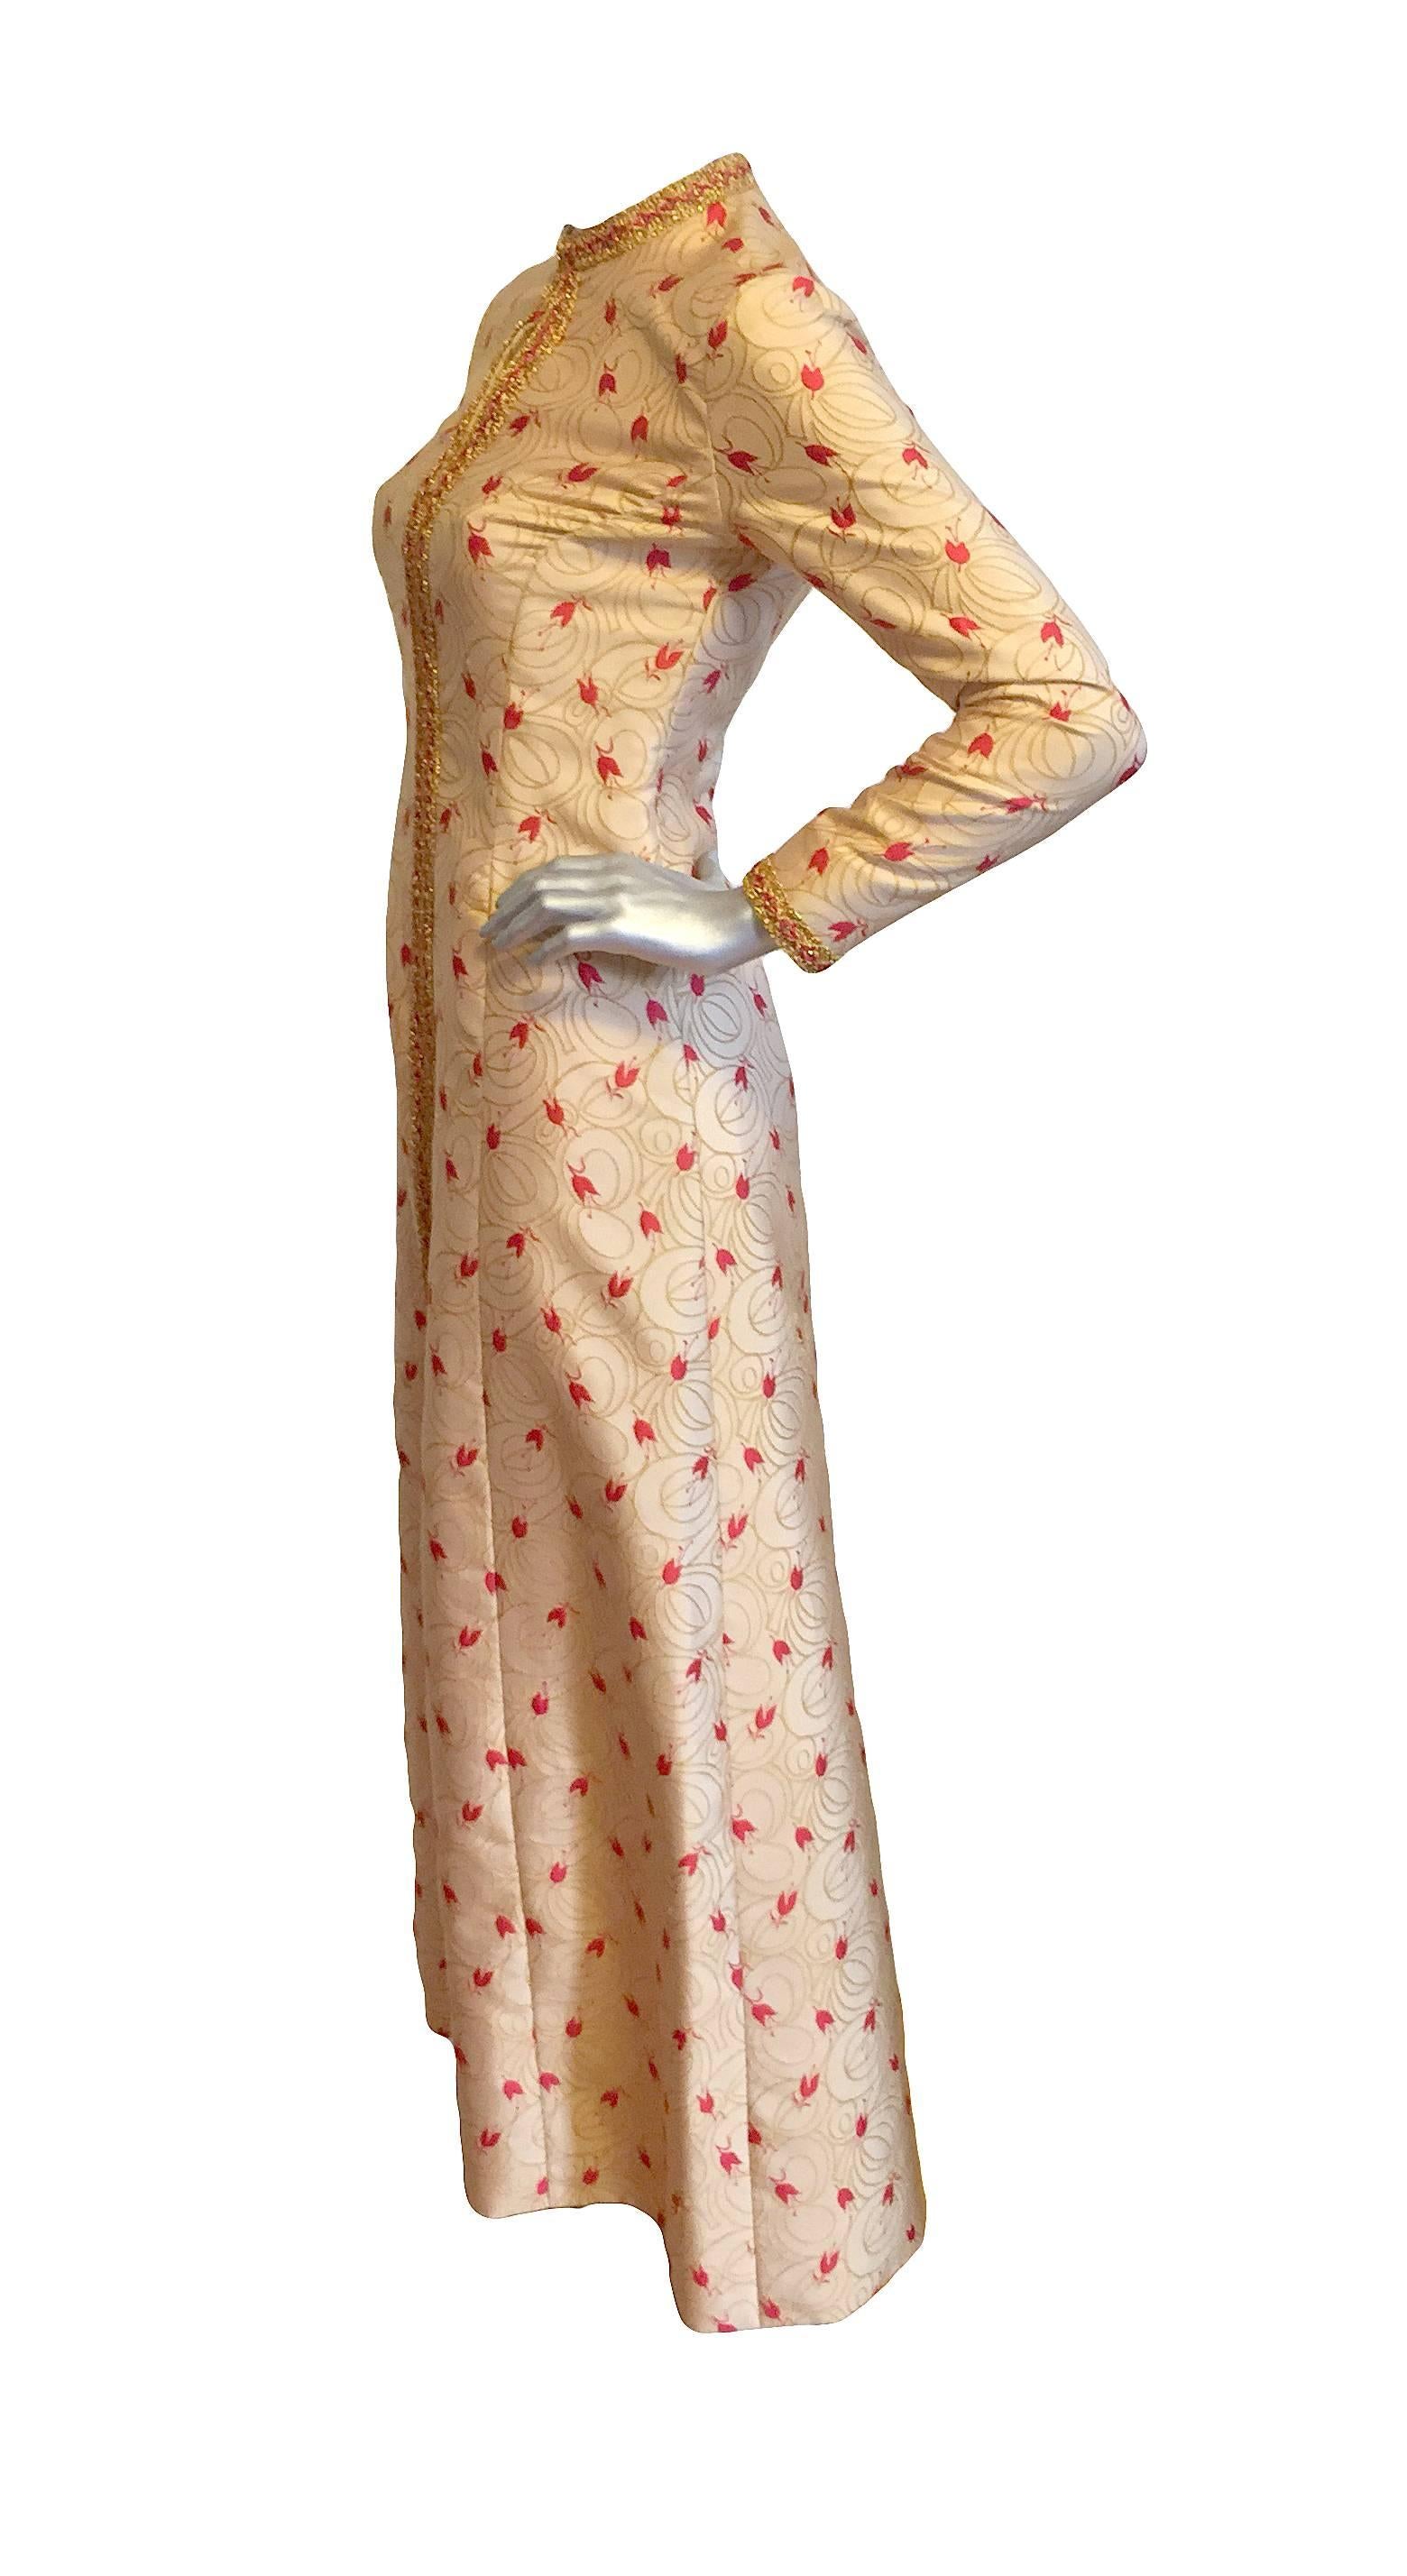 Regal Adele Simpson yellow and red brocade gown with metallic trim, key hole at neck, and front zipper closure. 

Measurements: Length 54